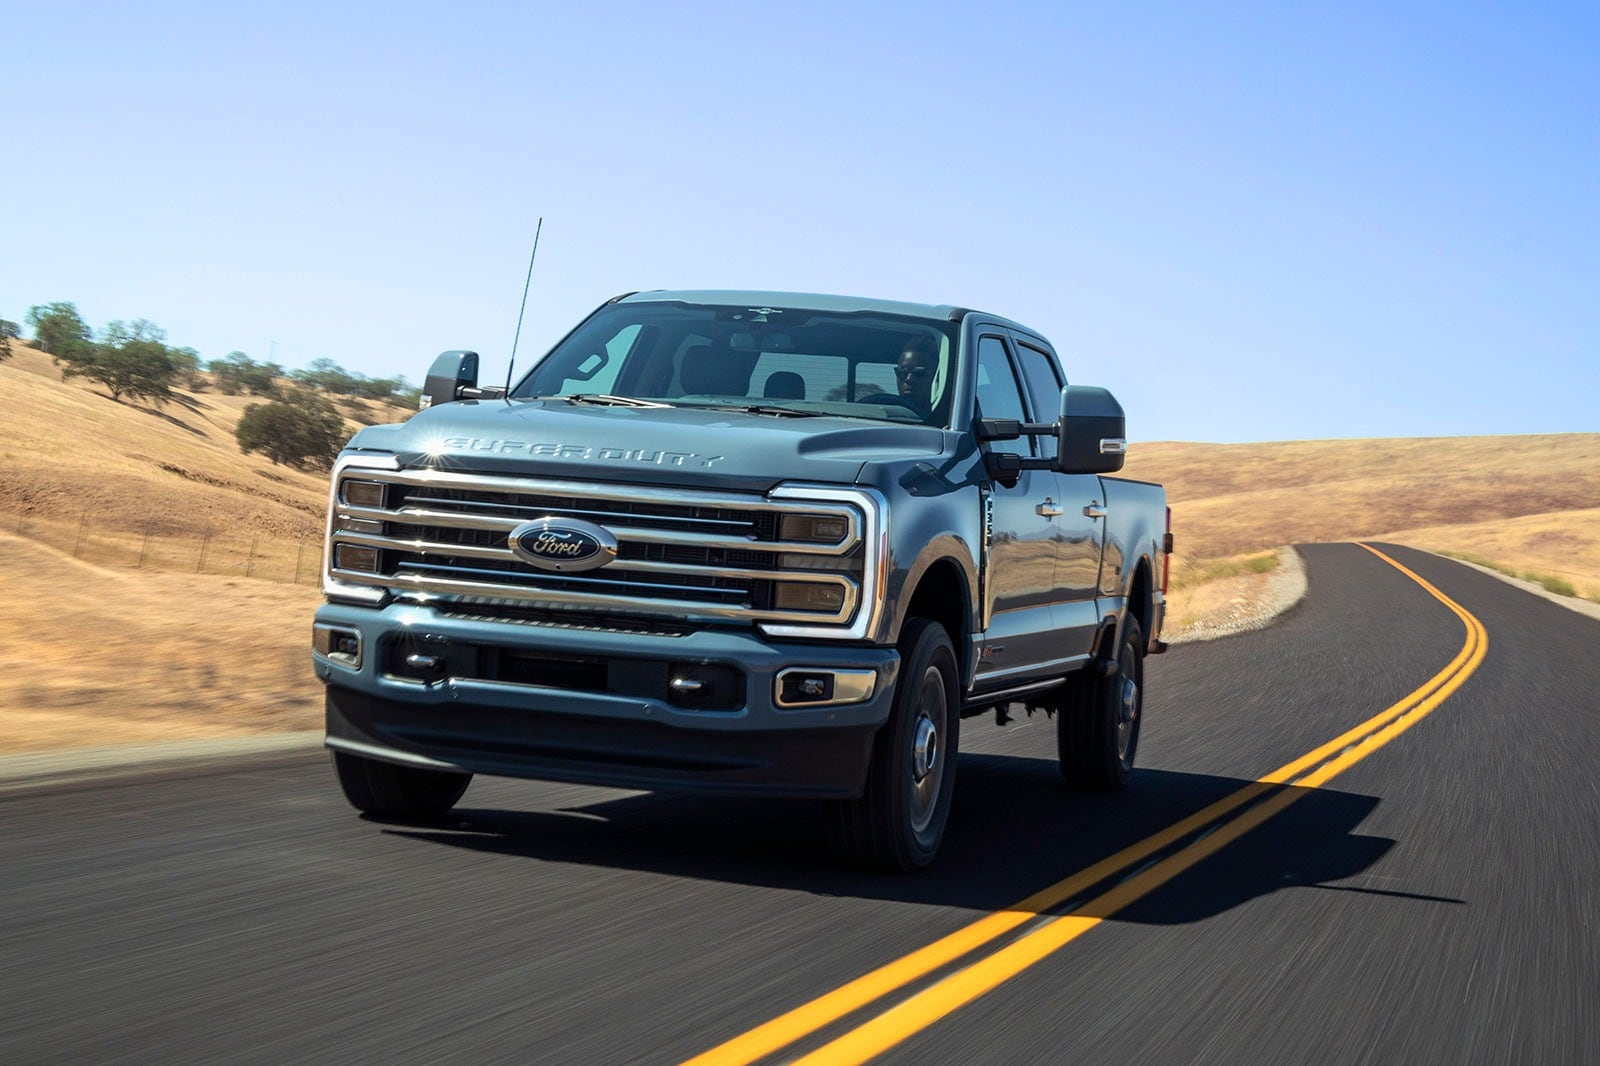 The New 2023 Ford F-250 Super Duty Looks Ready to Work